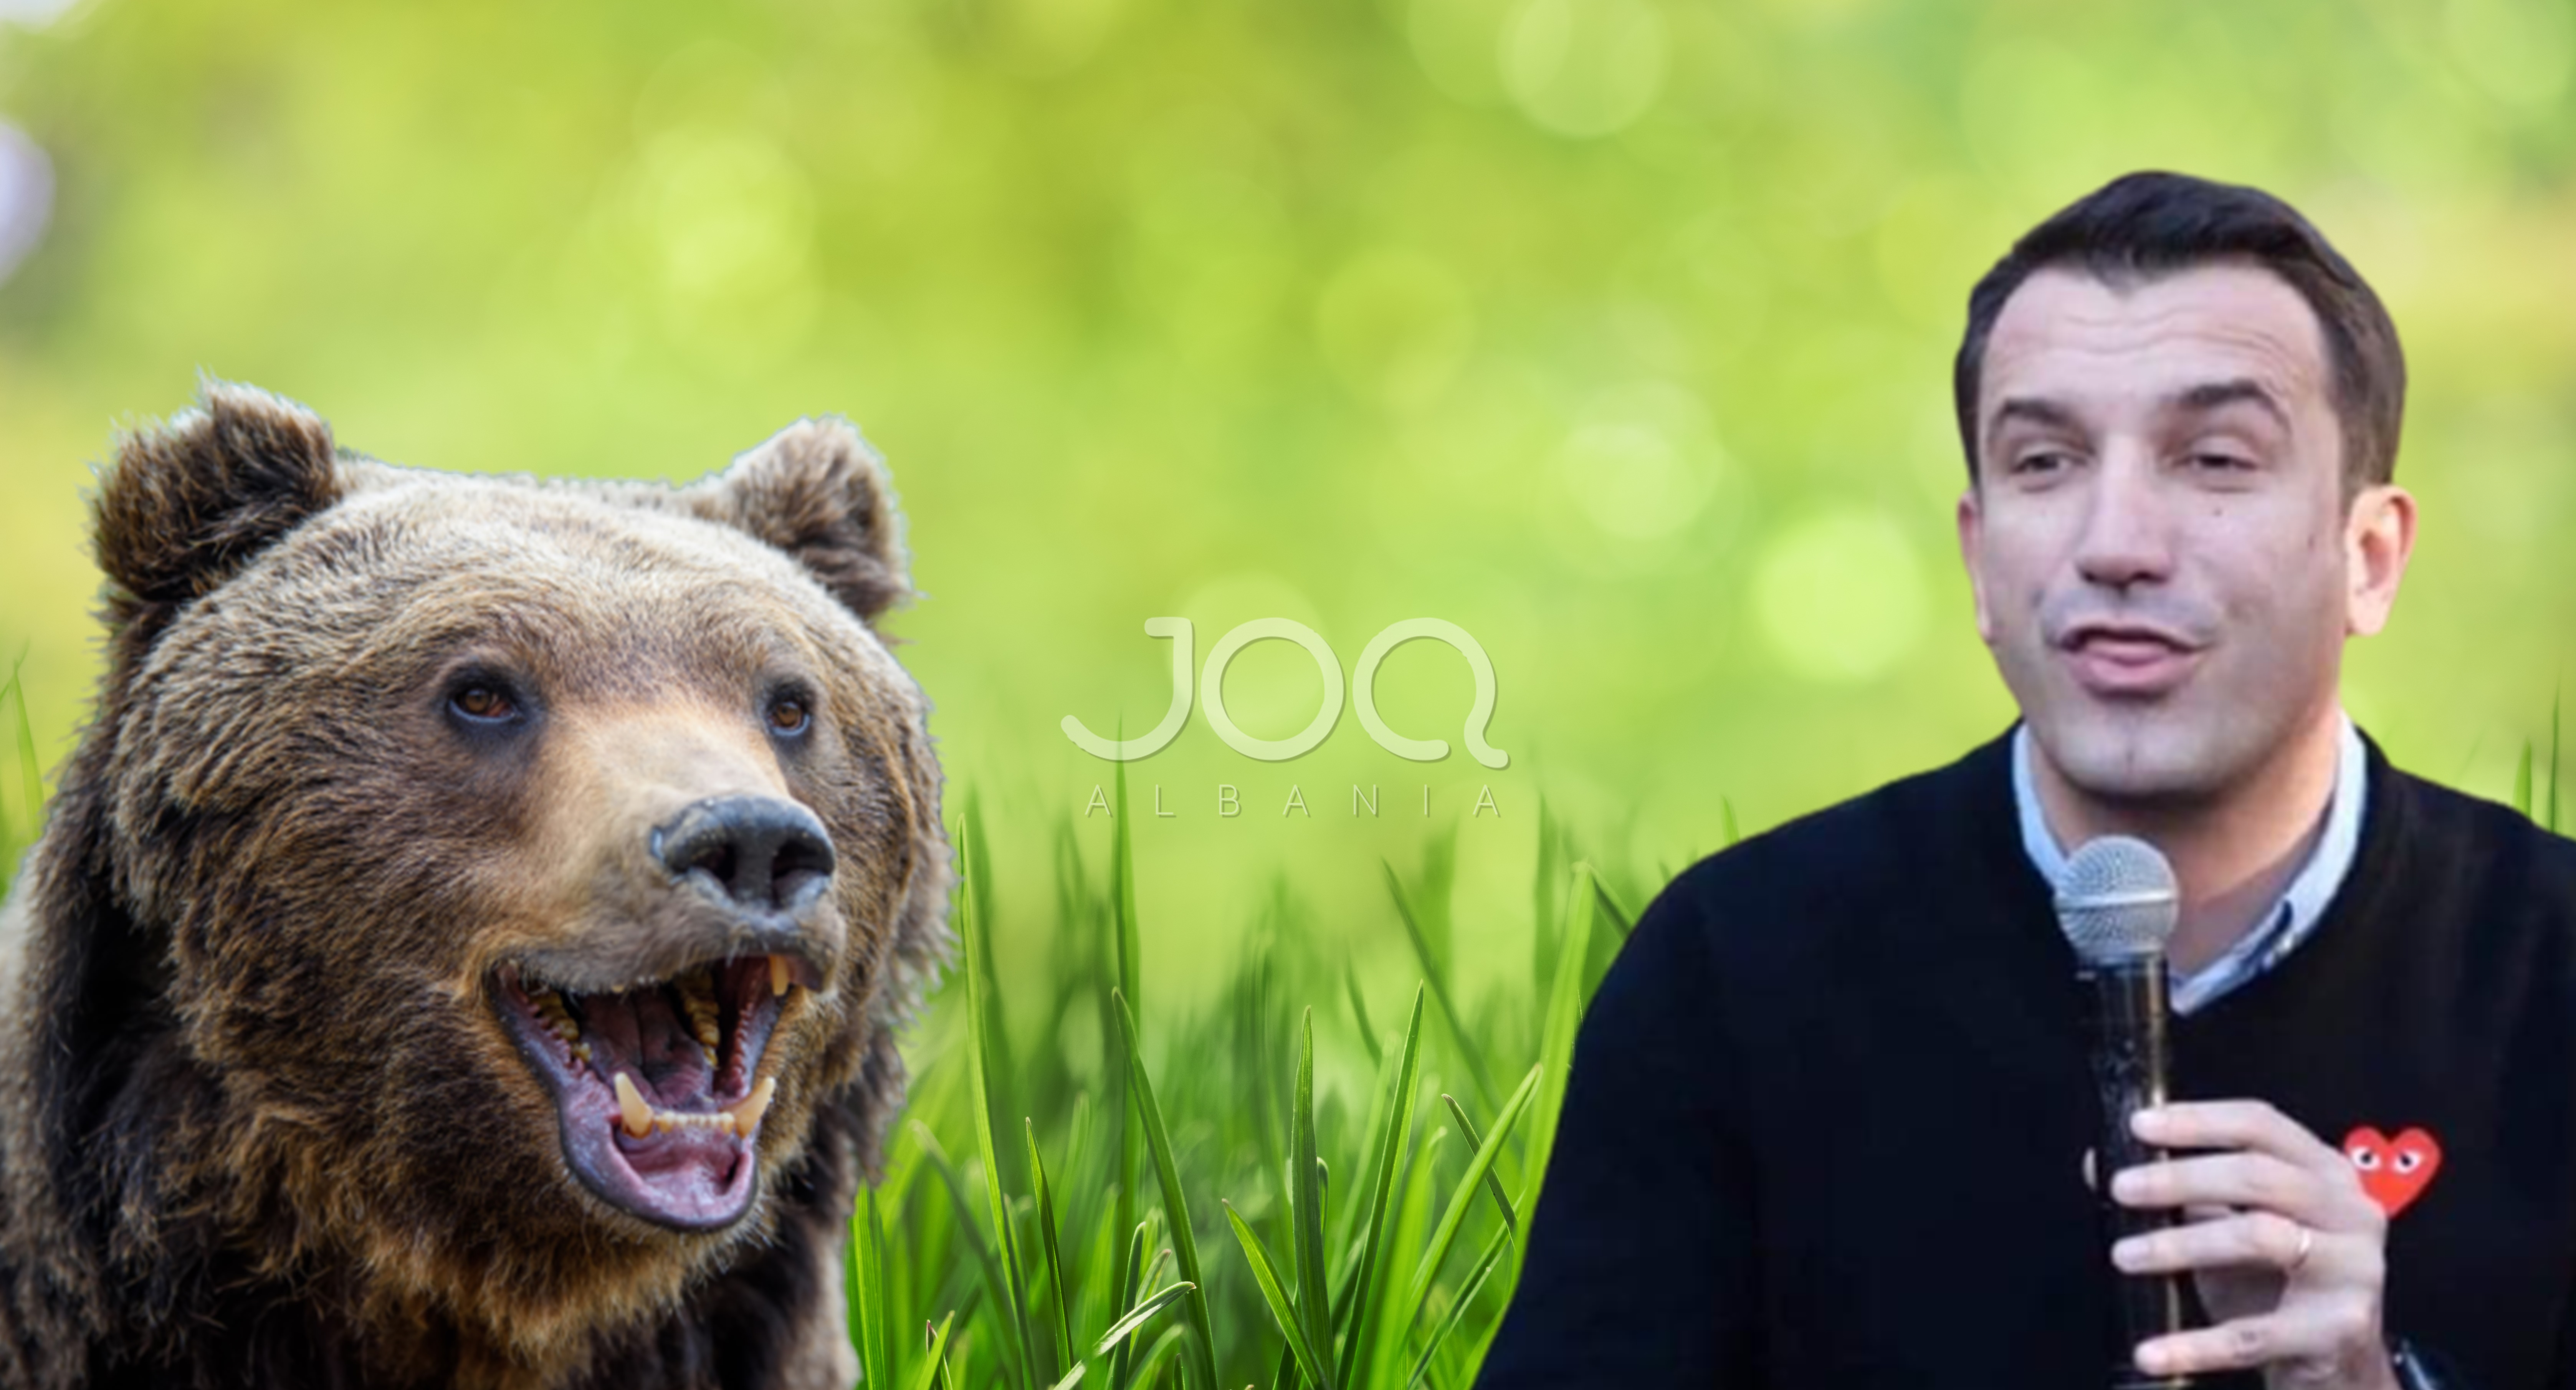 Erion Veliaj spends 85 million to buy bread with jam for the lion and the bear at the Zoo